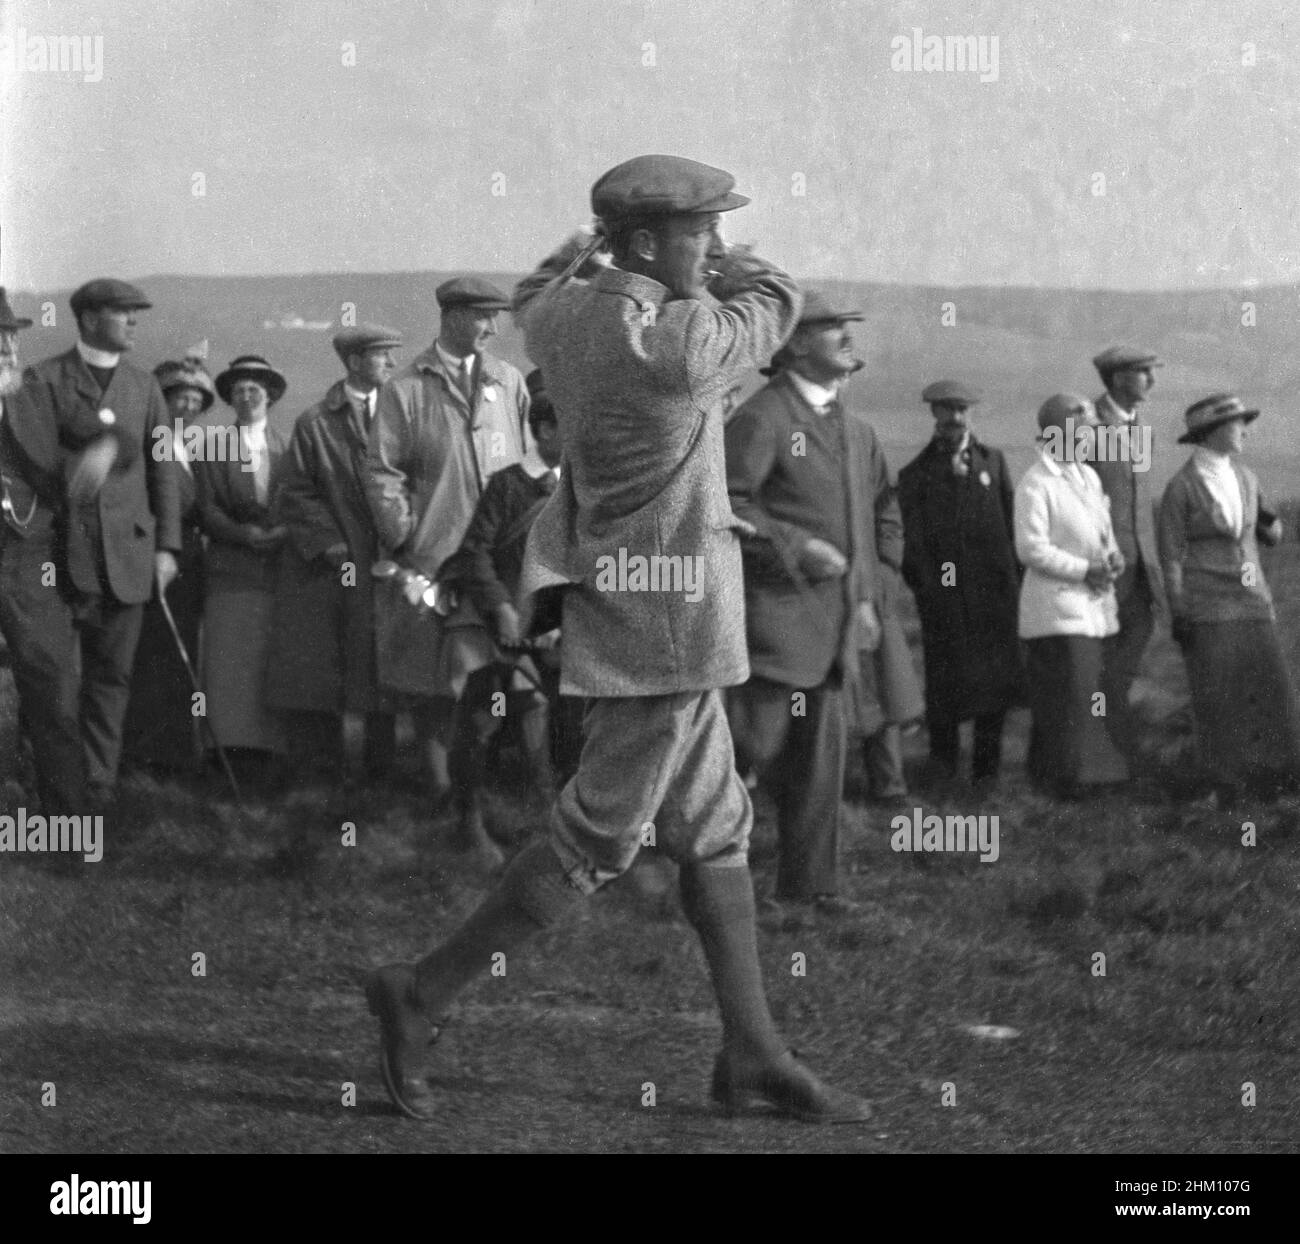 circa 1910, historical, a professional male golfer - possibly Harry Vardon - in a jacket, plus-twos and a cloth cap and cigarette in his mouth hiting a shot, watched by a small group of spectators in the formal clothing of the time. His playing partner, J H. Taylor, co-founder of the British PGA in 1901 and a five-time winner of the British Open Championship was a golfing pioneer of the era. Stock Photo